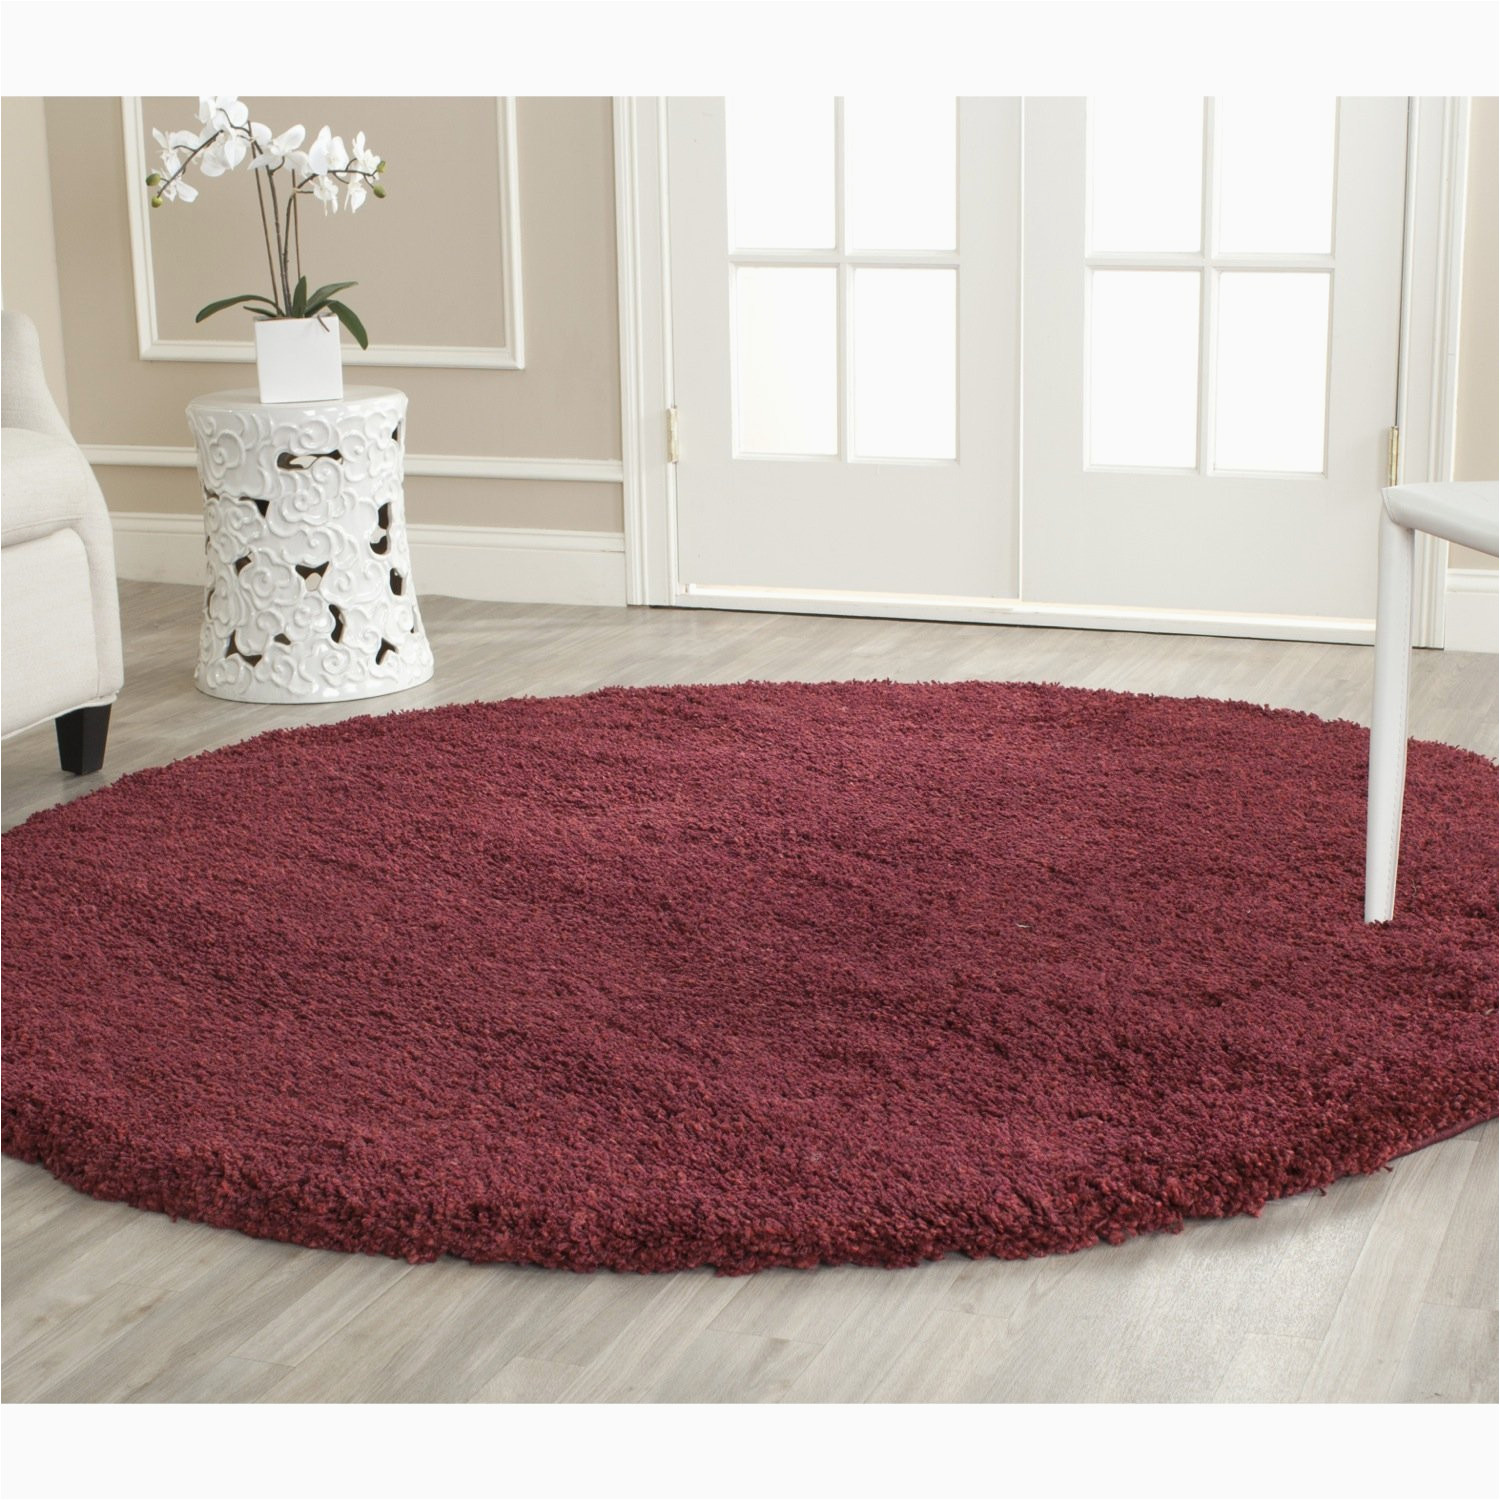 2 Inch Pile area Rug Cozy soft Thick Maroon Shag area Rug 2 Inch Pile Height